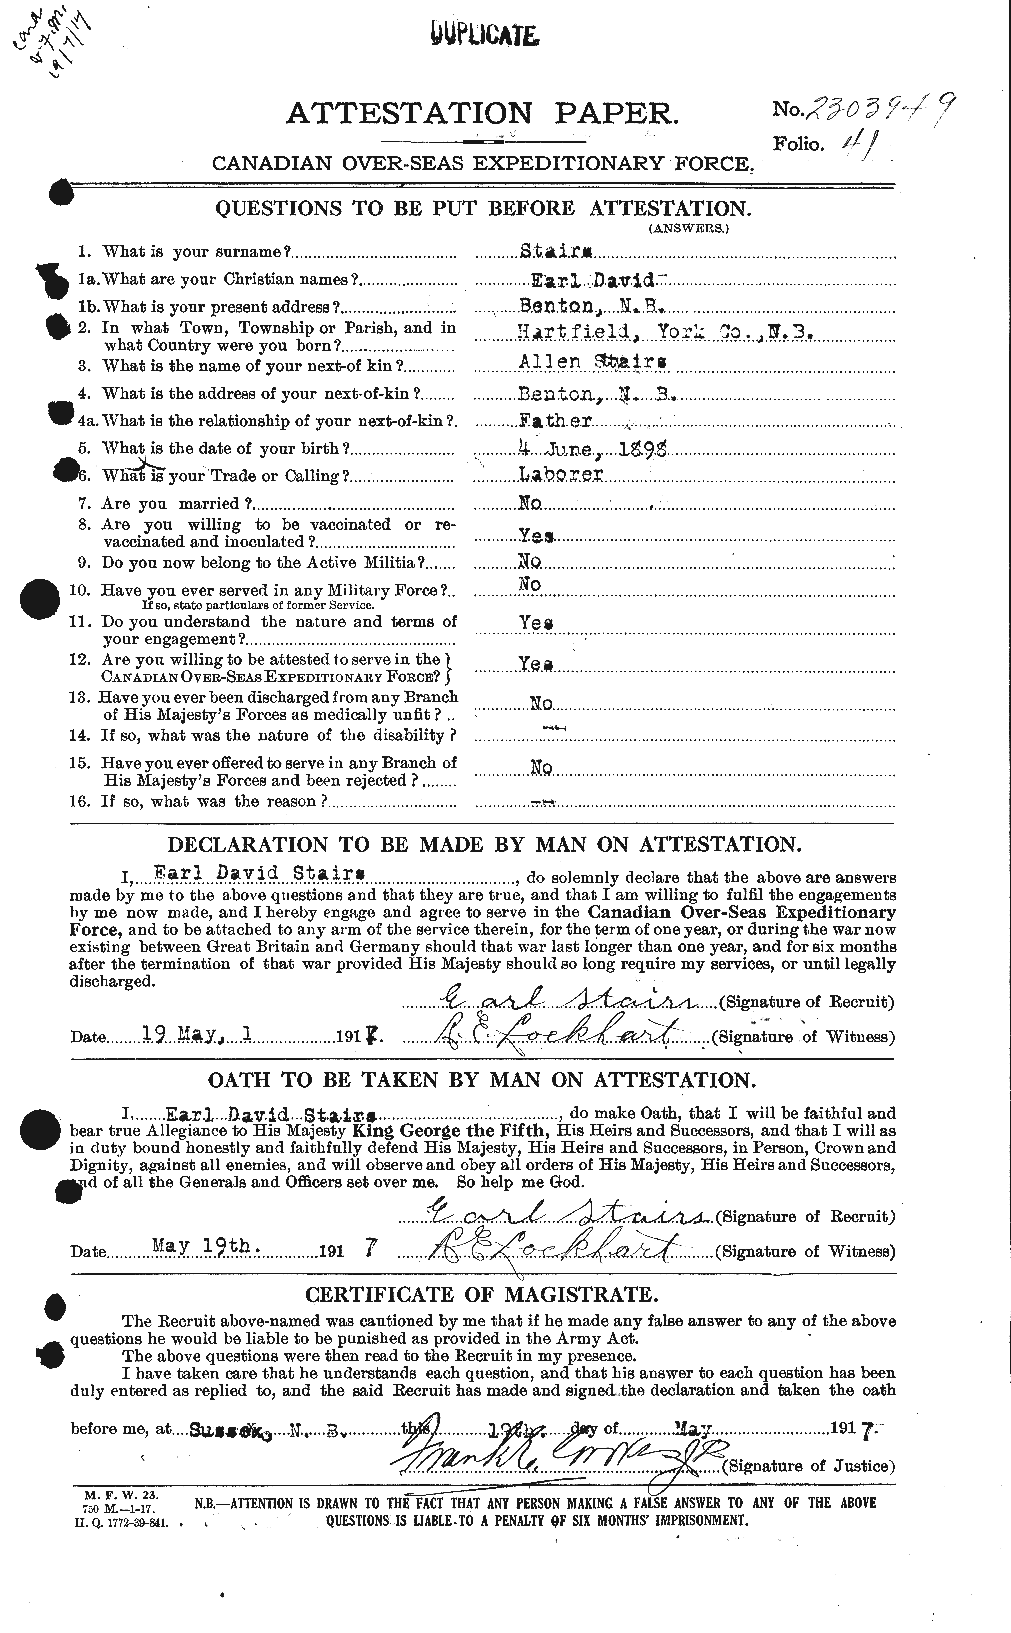 Personnel Records of the First World War - CEF 116820a